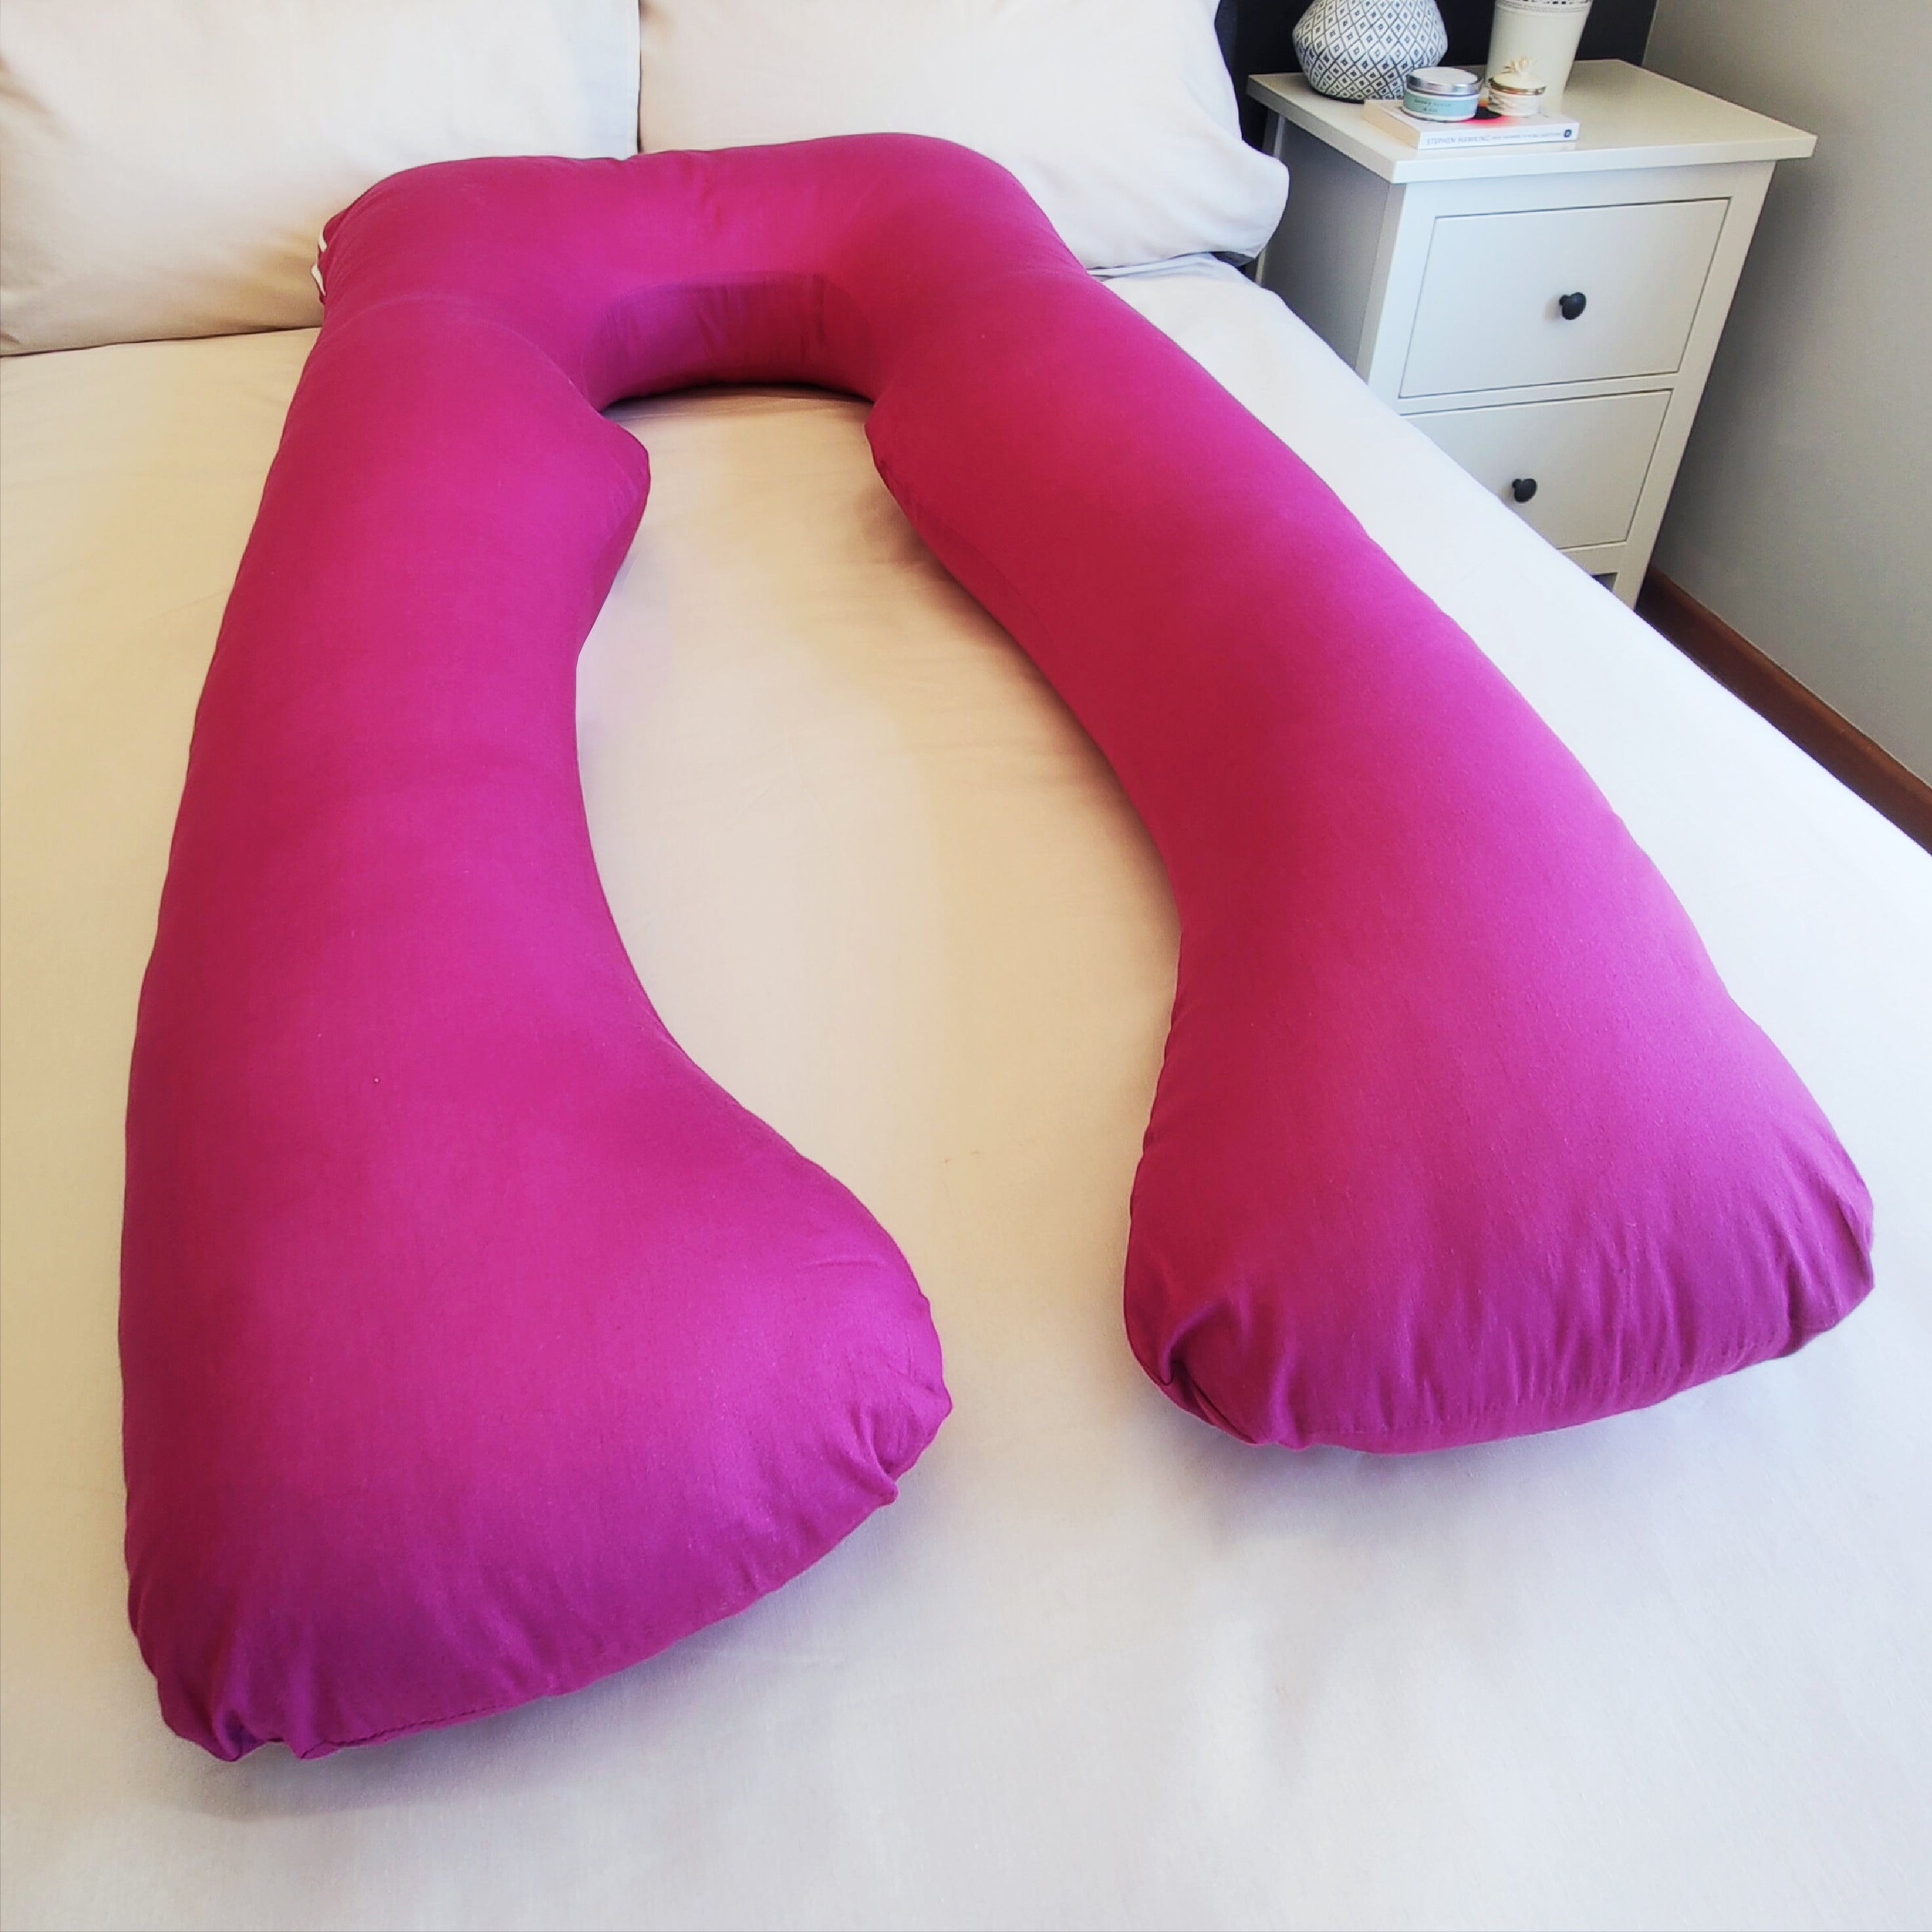 Magenta Pillow Pod Full Body Support Pillow on Bed, with Plain White Bed Spread